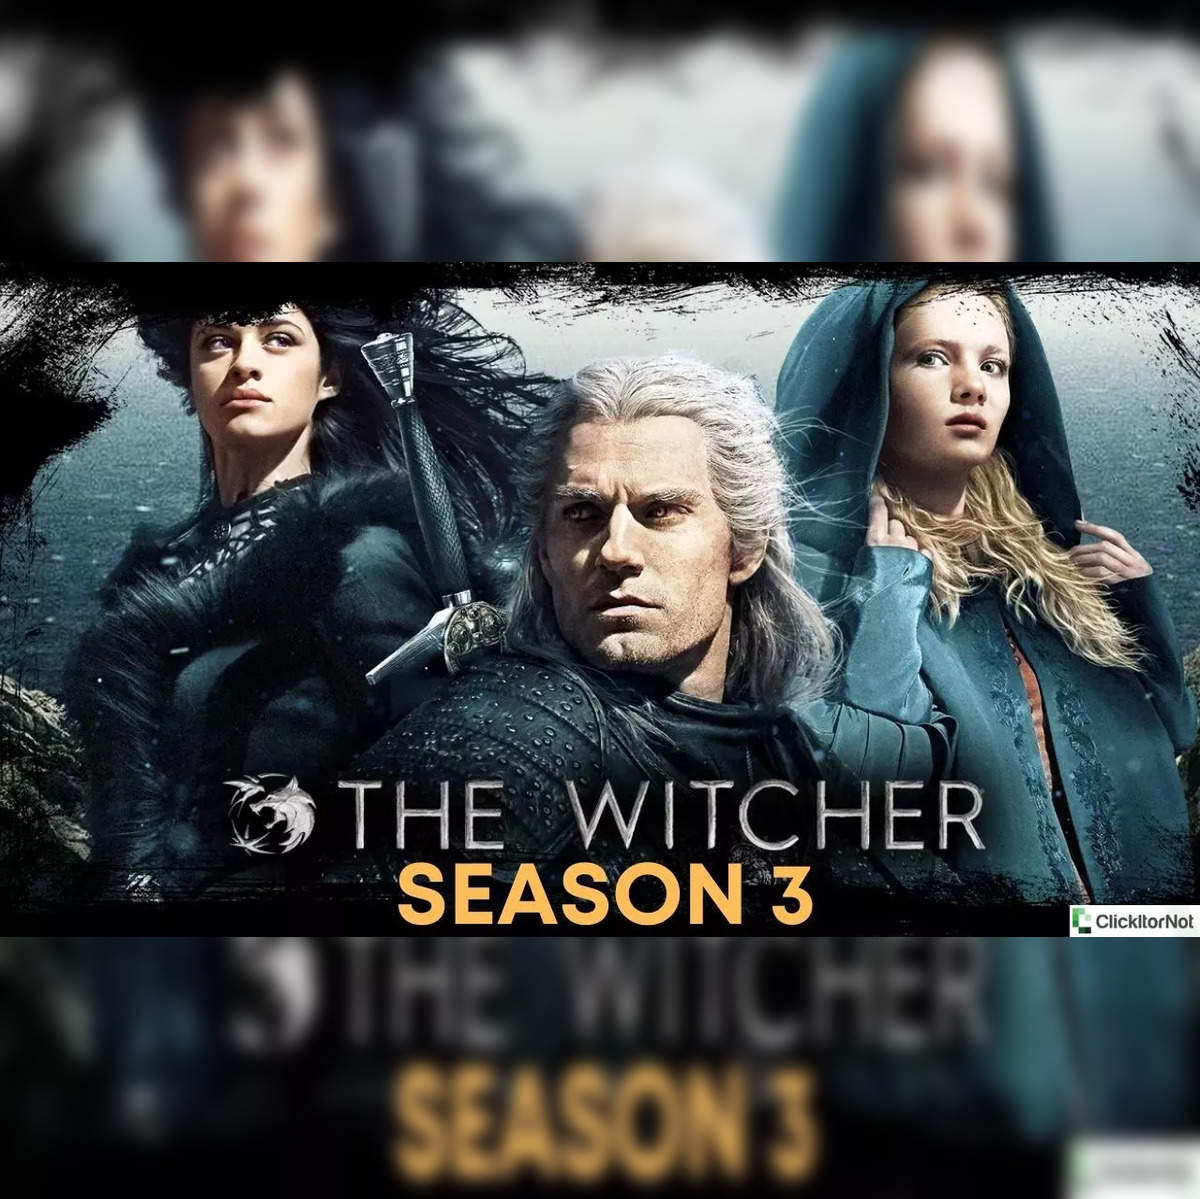 The Witcher season 3: 'The Witcher' season 3: Release date, streaming  details, how to watch in order - The Economic Times